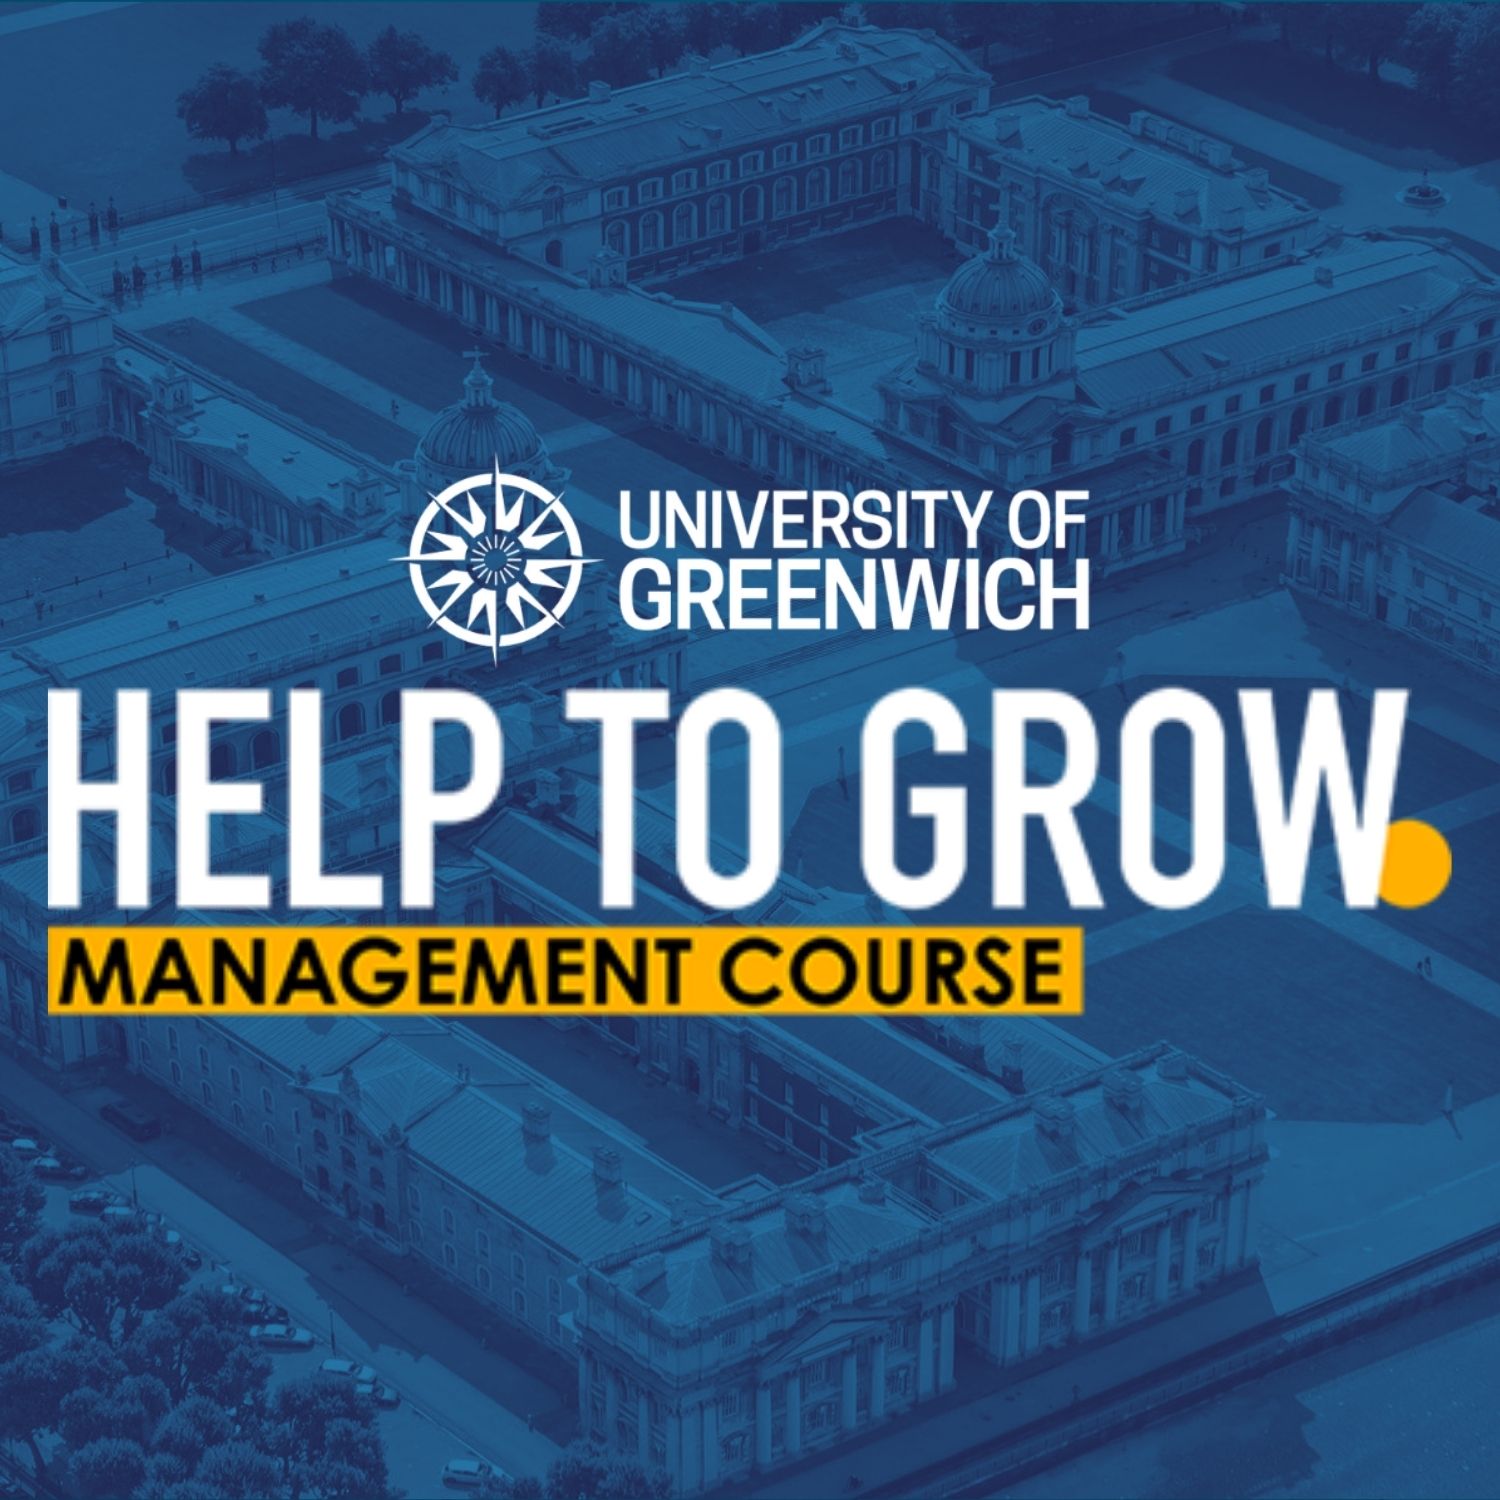 Help to Grow management course tag line over blue image of Greenwich campus